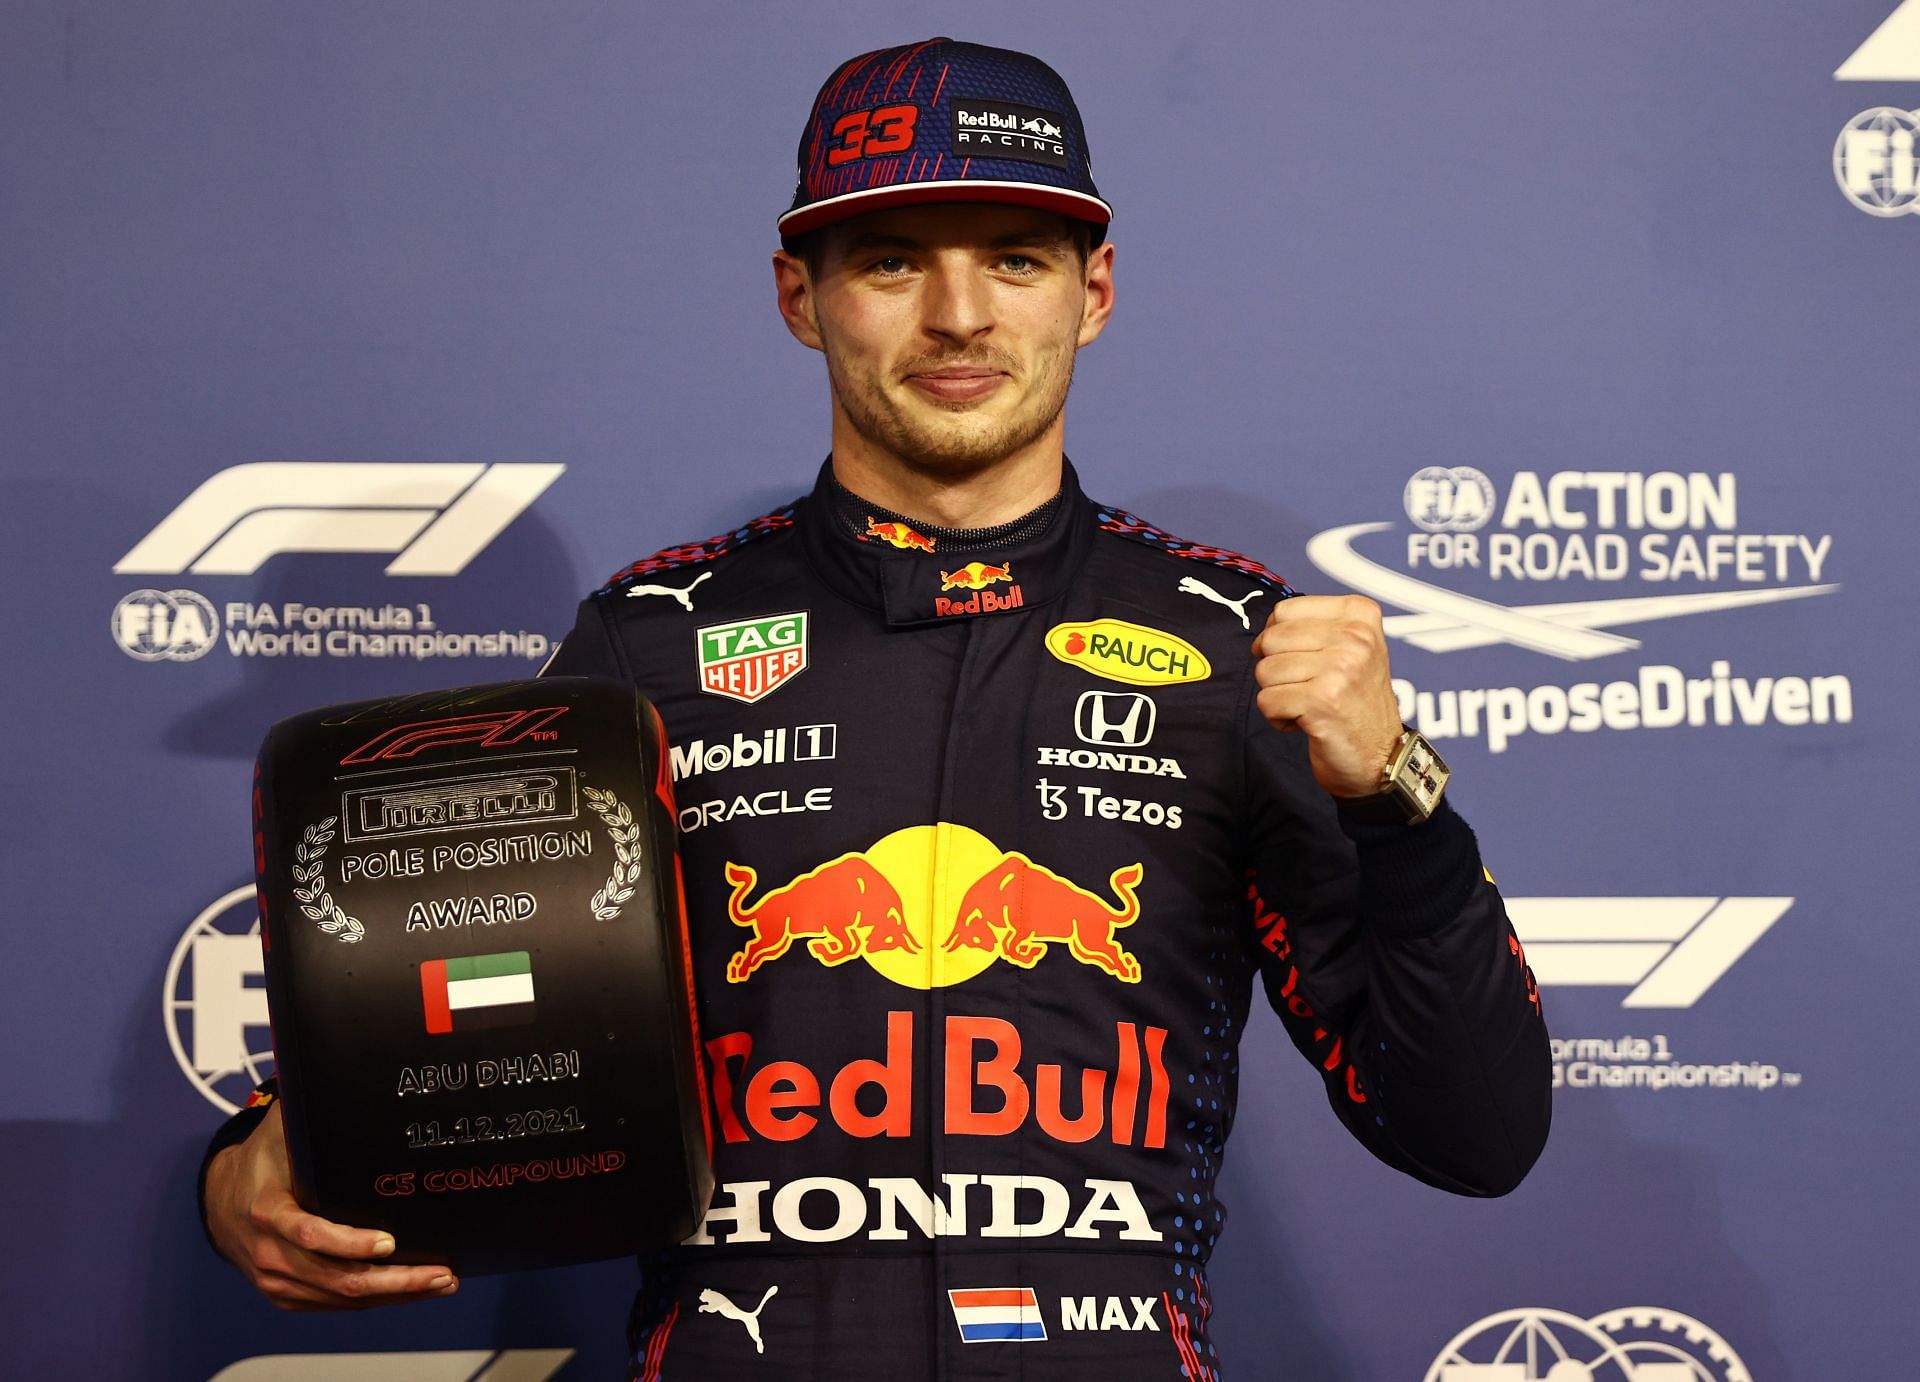 Pole position qualifier Max Verstappen celebrates in parc ferme during qualifying ahead of the 2021 Abu Dhabi Grand Prix.